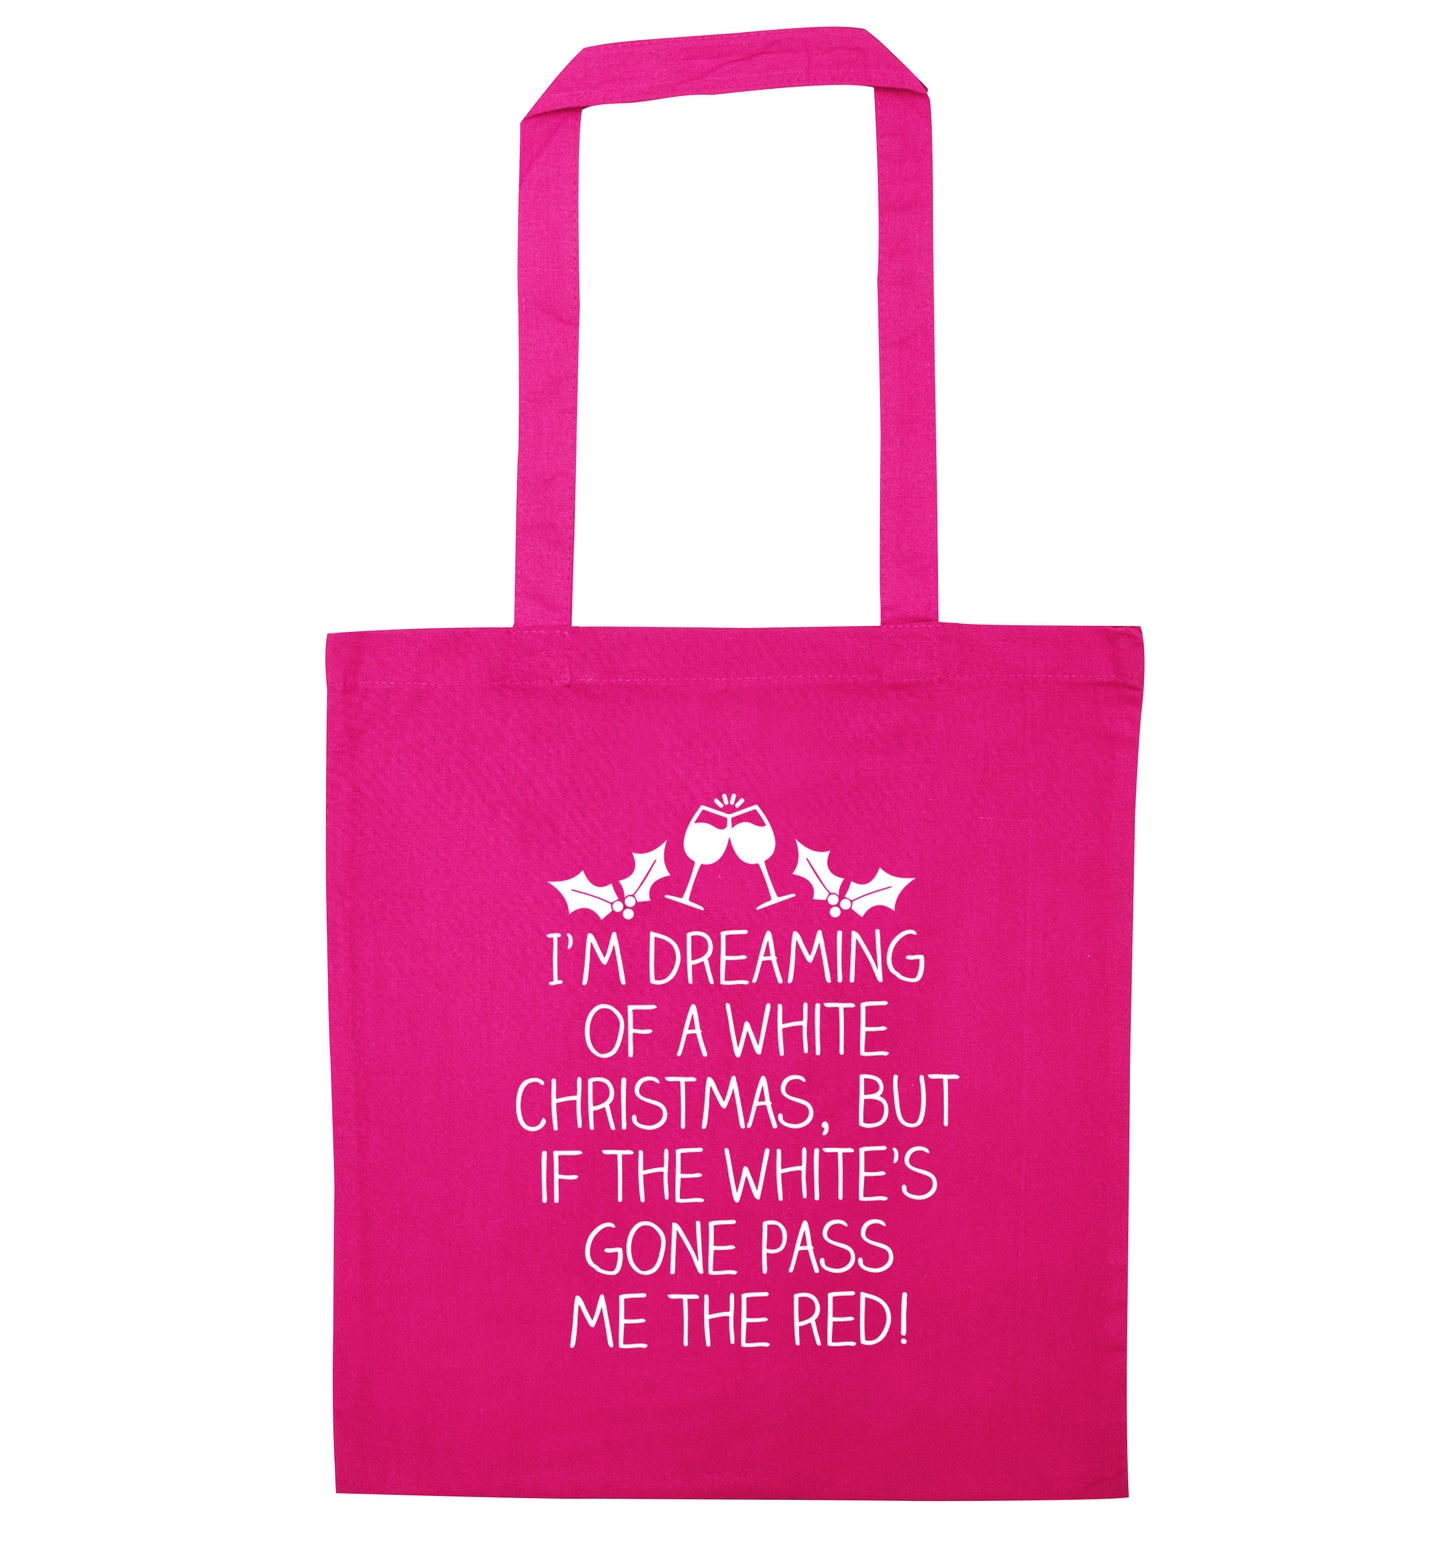 I'm dreaming of a white christmas, but if the white's gone pass me the red! pink tote bag